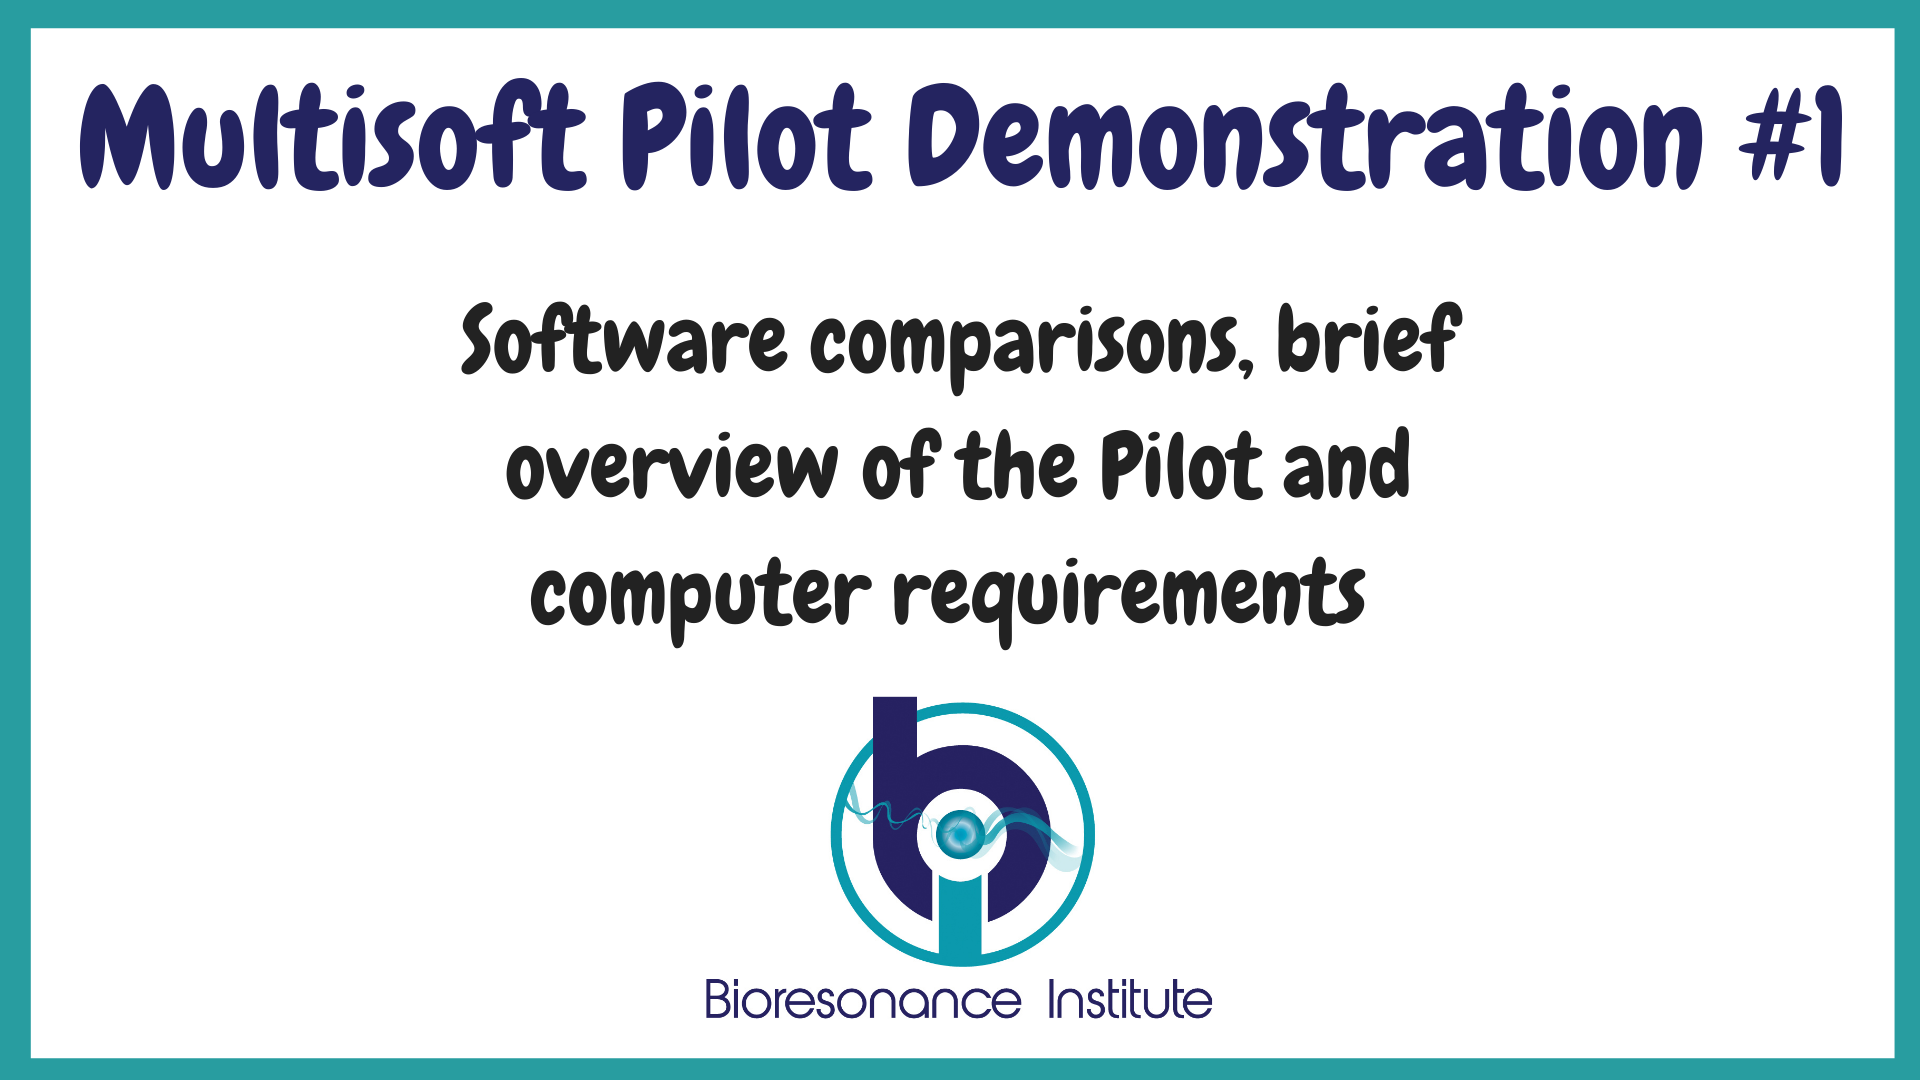 Multisoft Pilot demonstration video 1 compare software using the pilot and computer